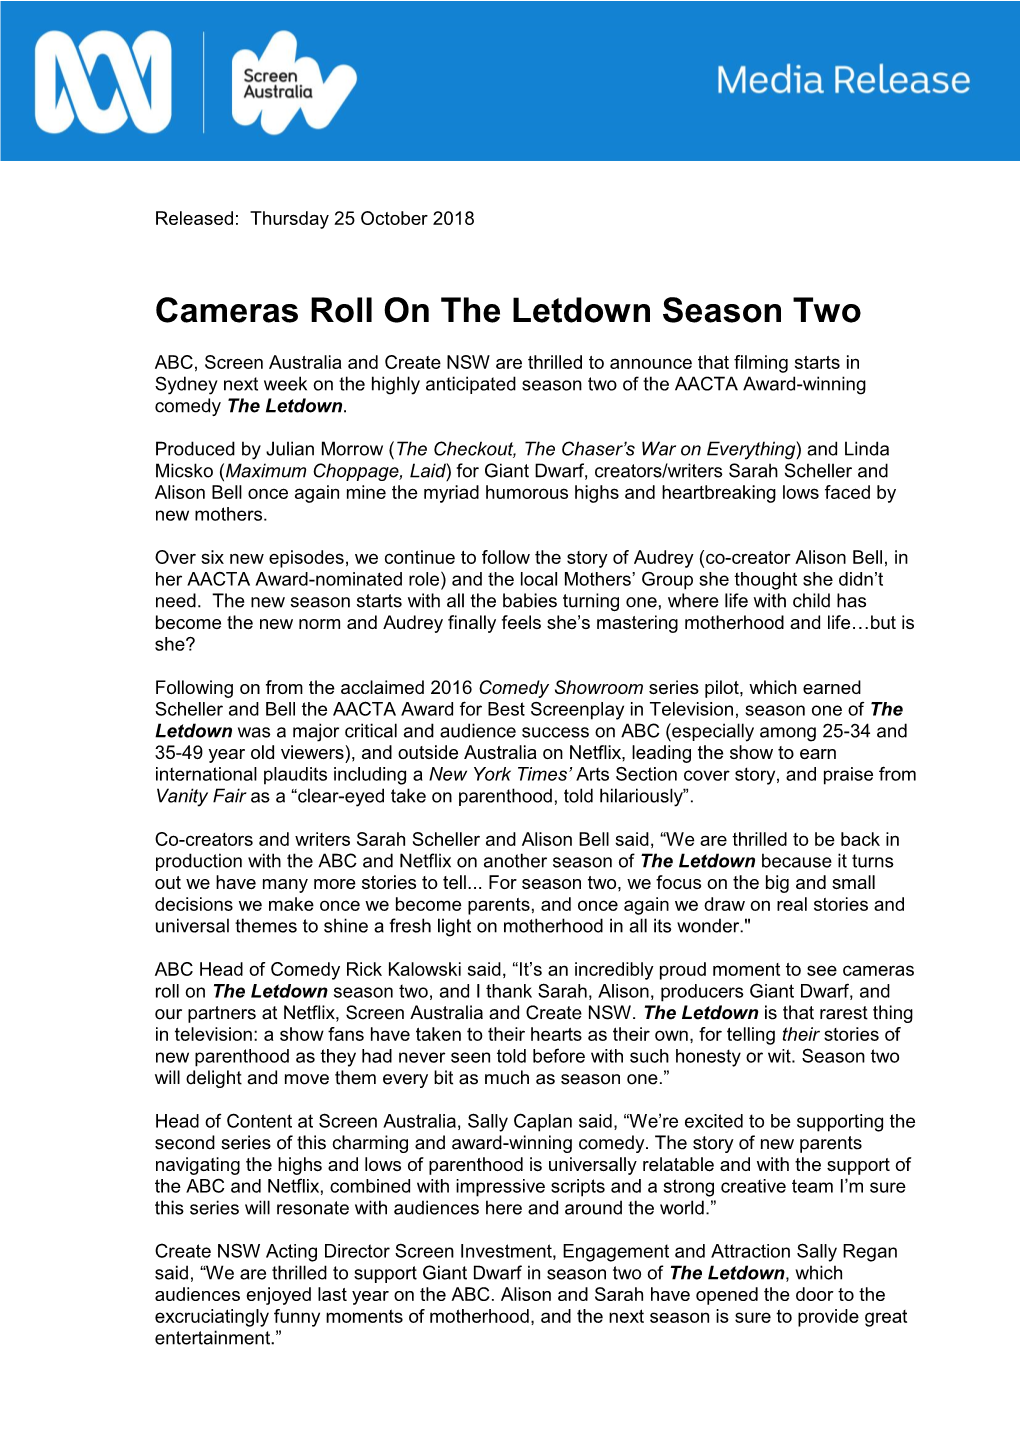 Cameras Roll on the Letdown Season Two